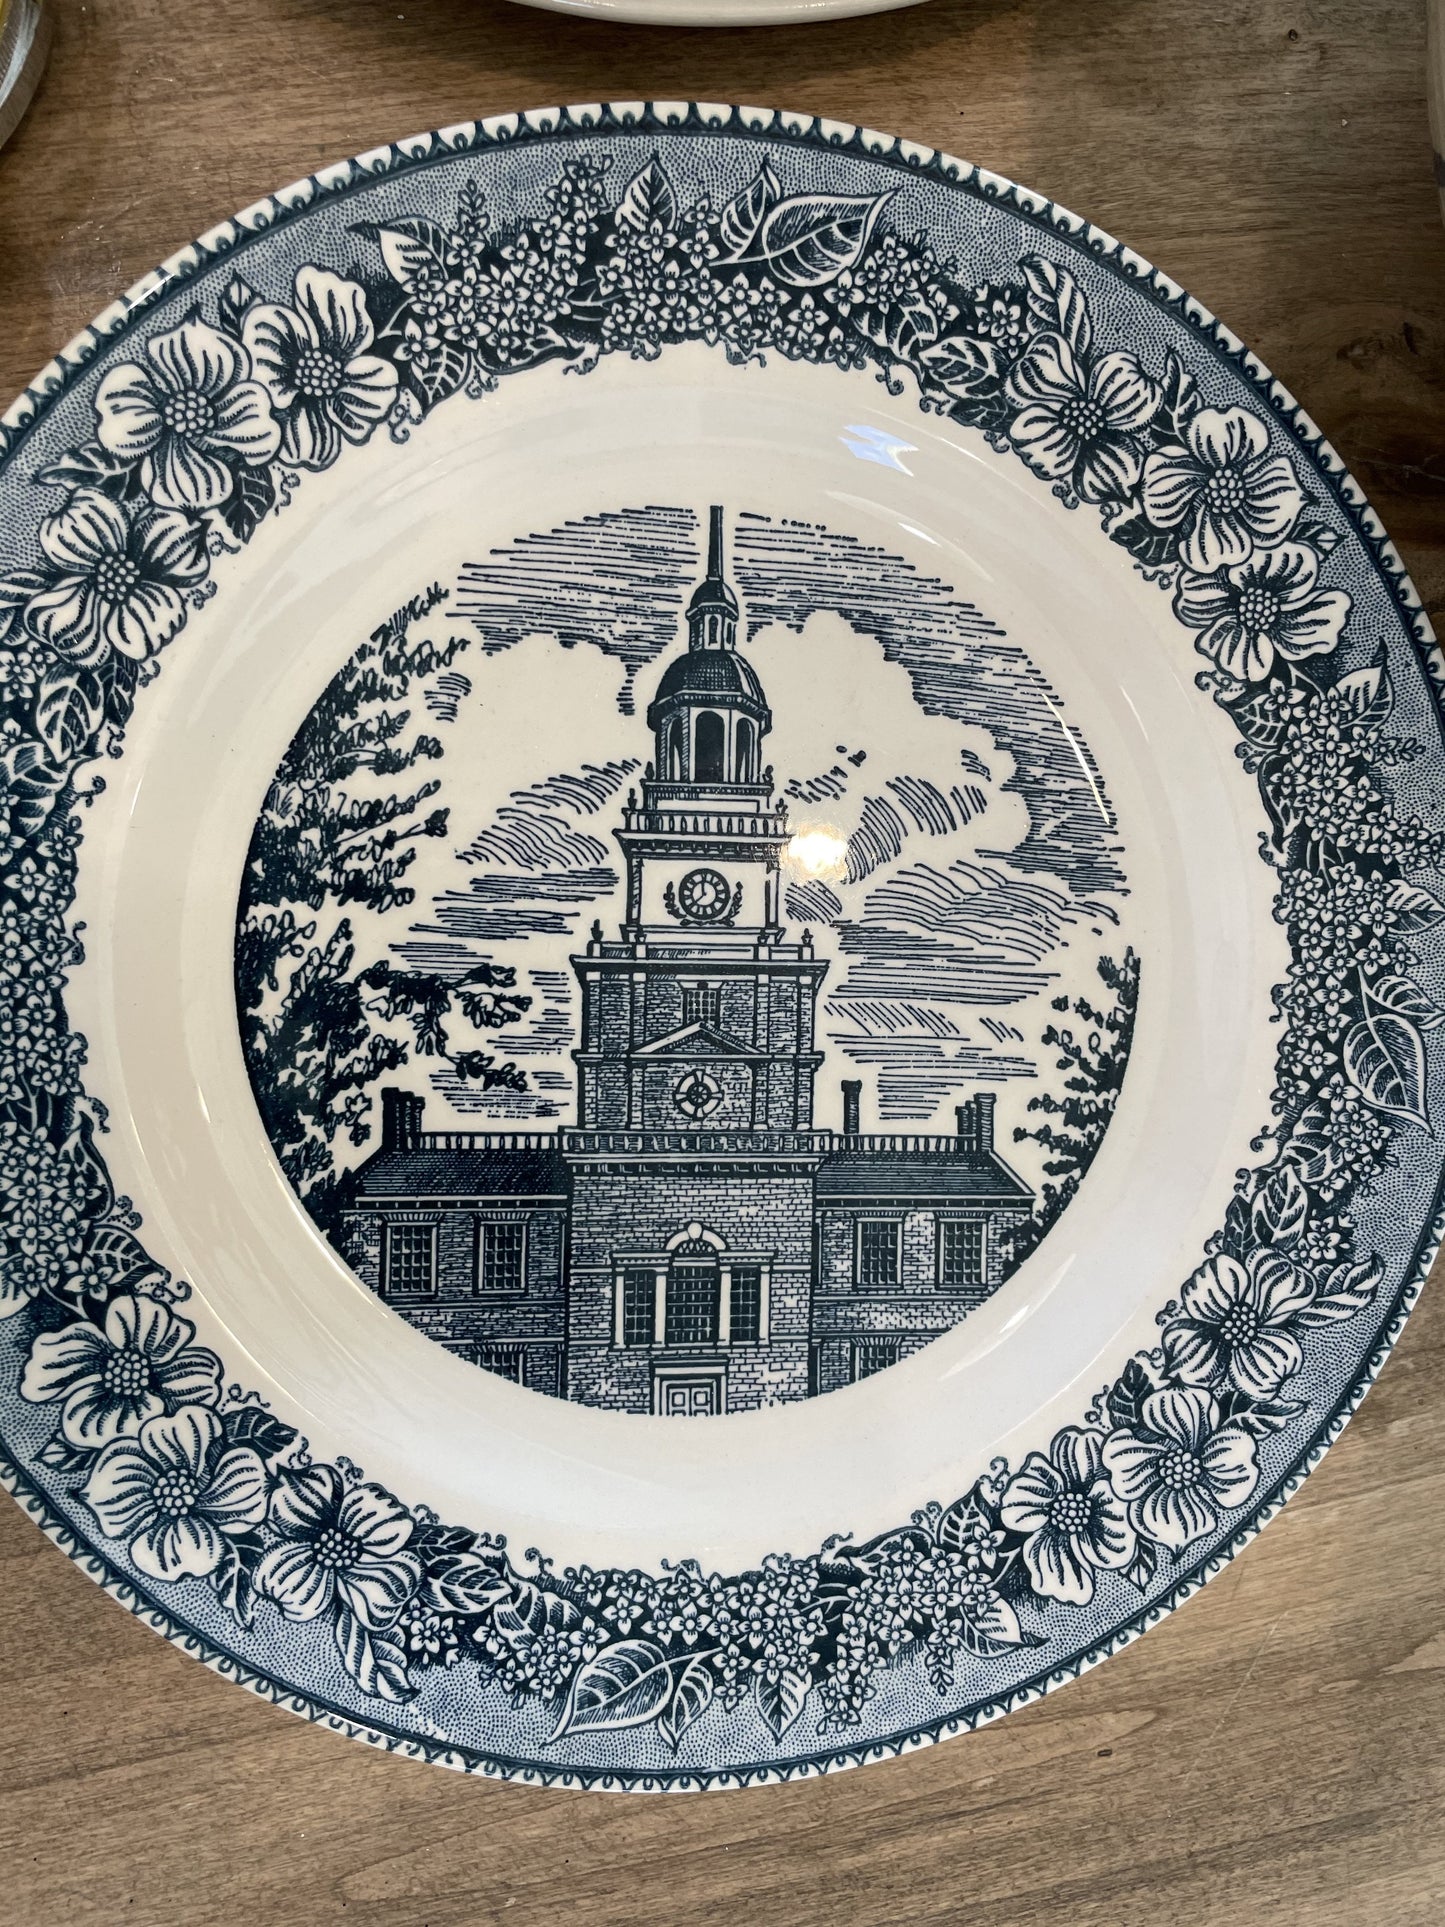 Blue and White Ironstone collection